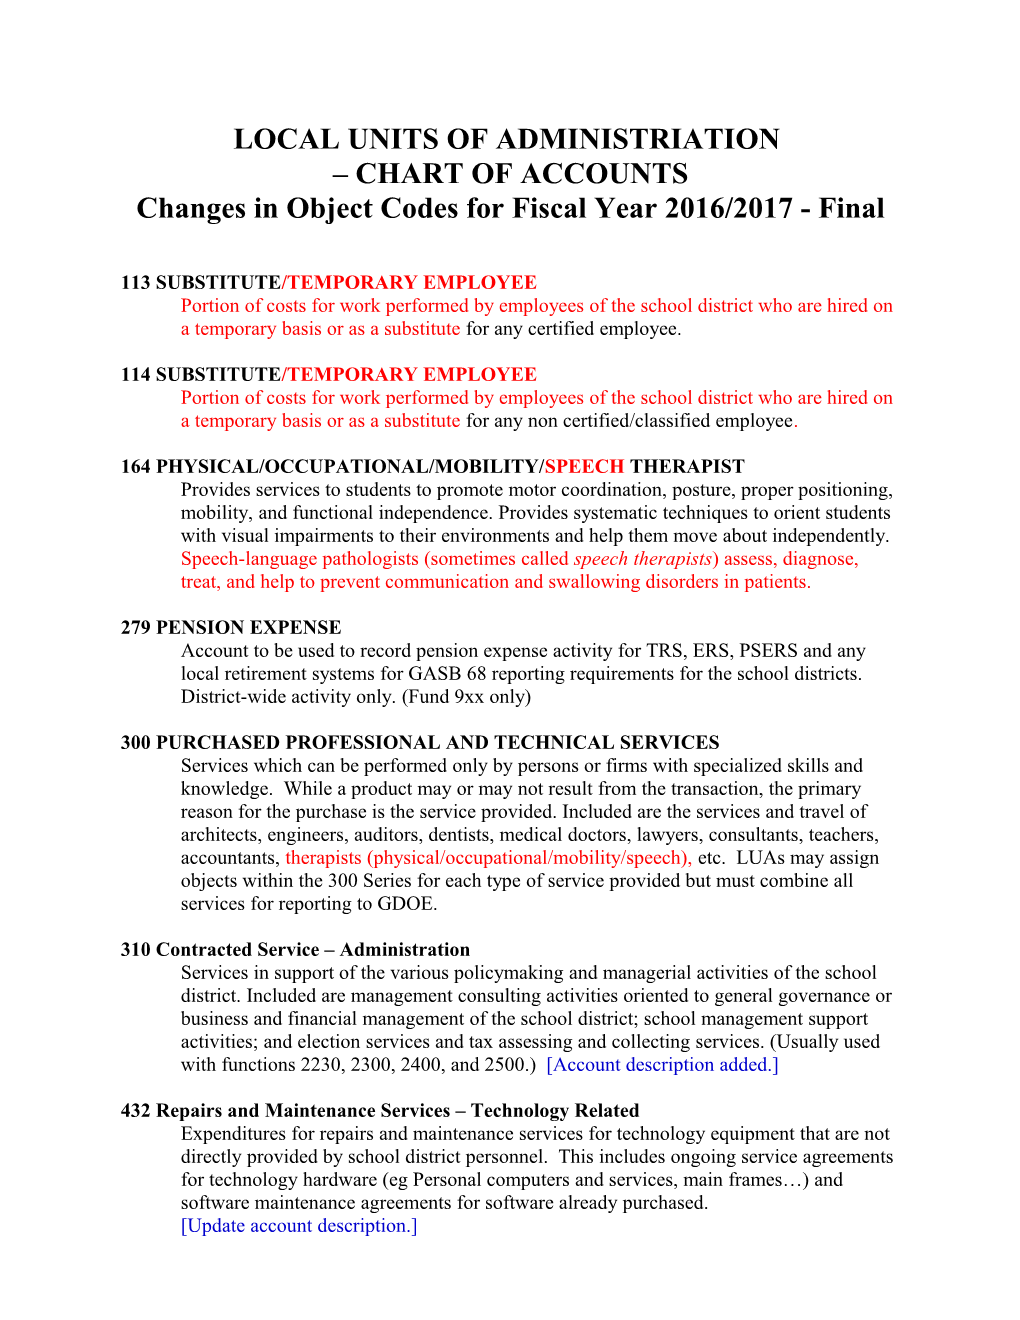 Changes in Object Codes for Fiscal Year 2016/2017 - Final